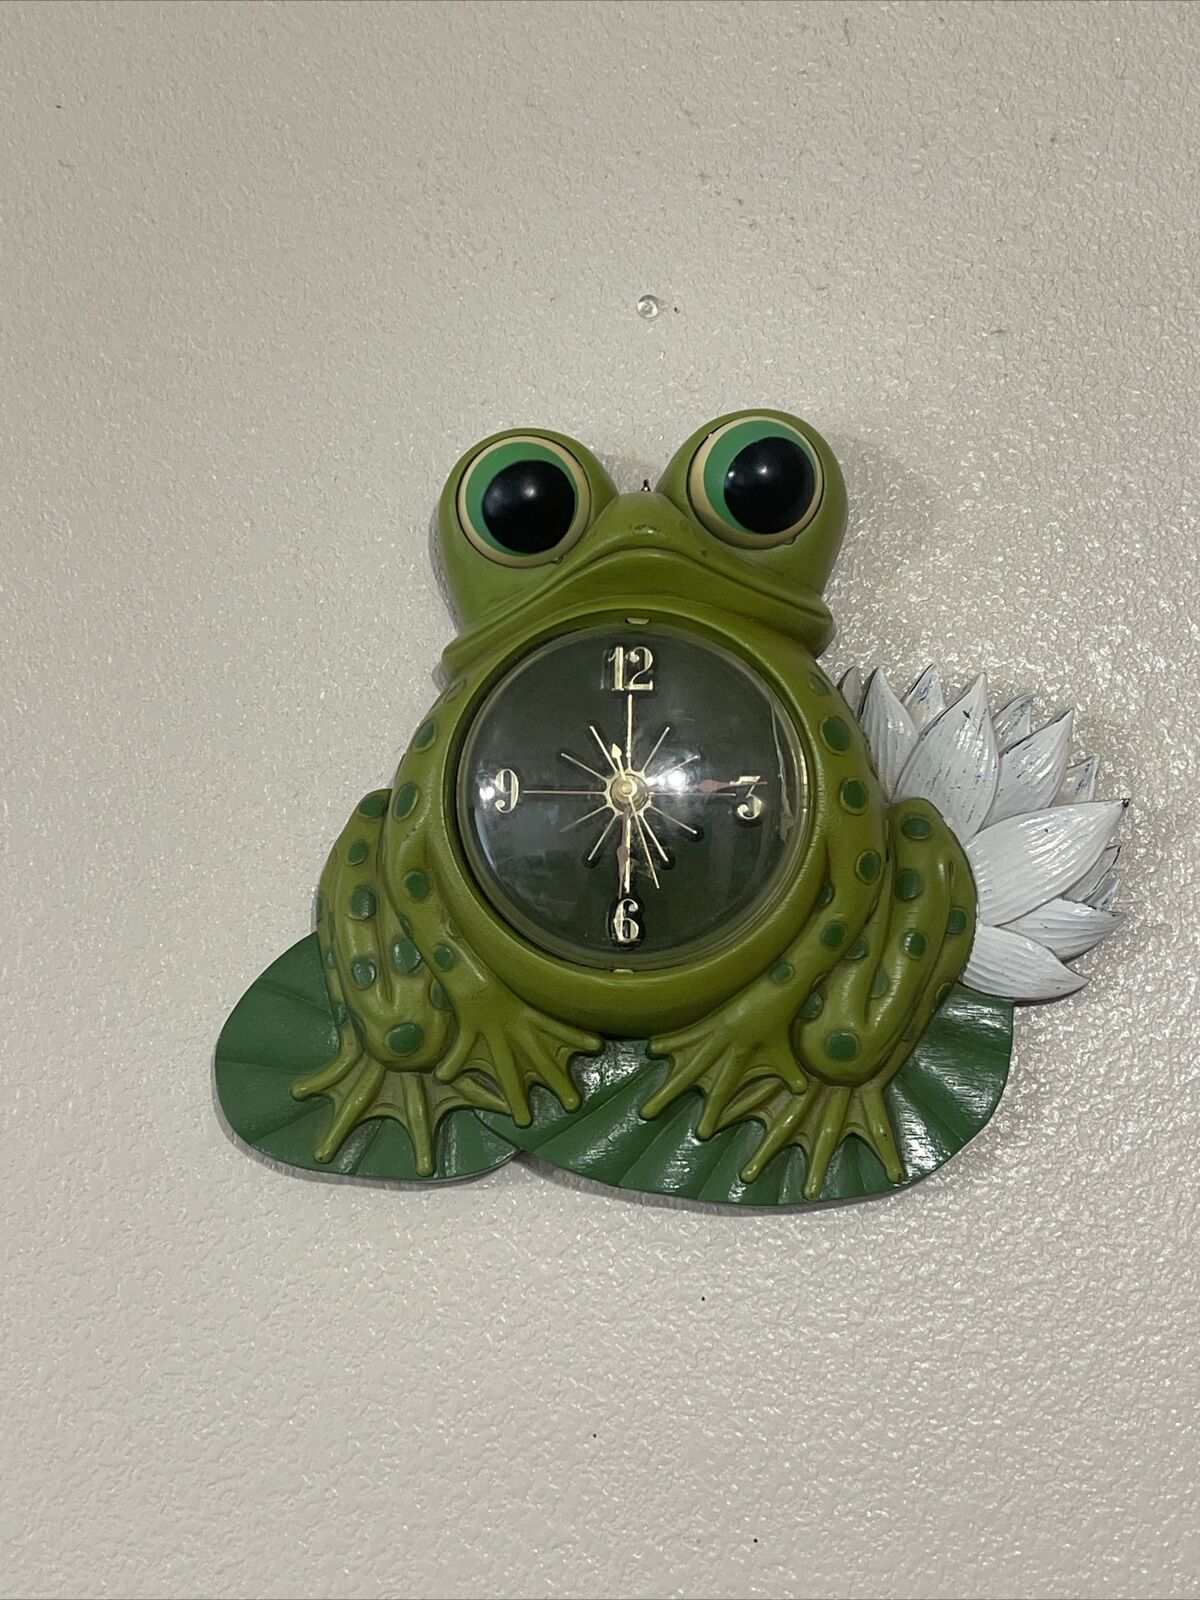 Vintage 1970's Burwood Products Frog Electric Wall Clock   Tested Working